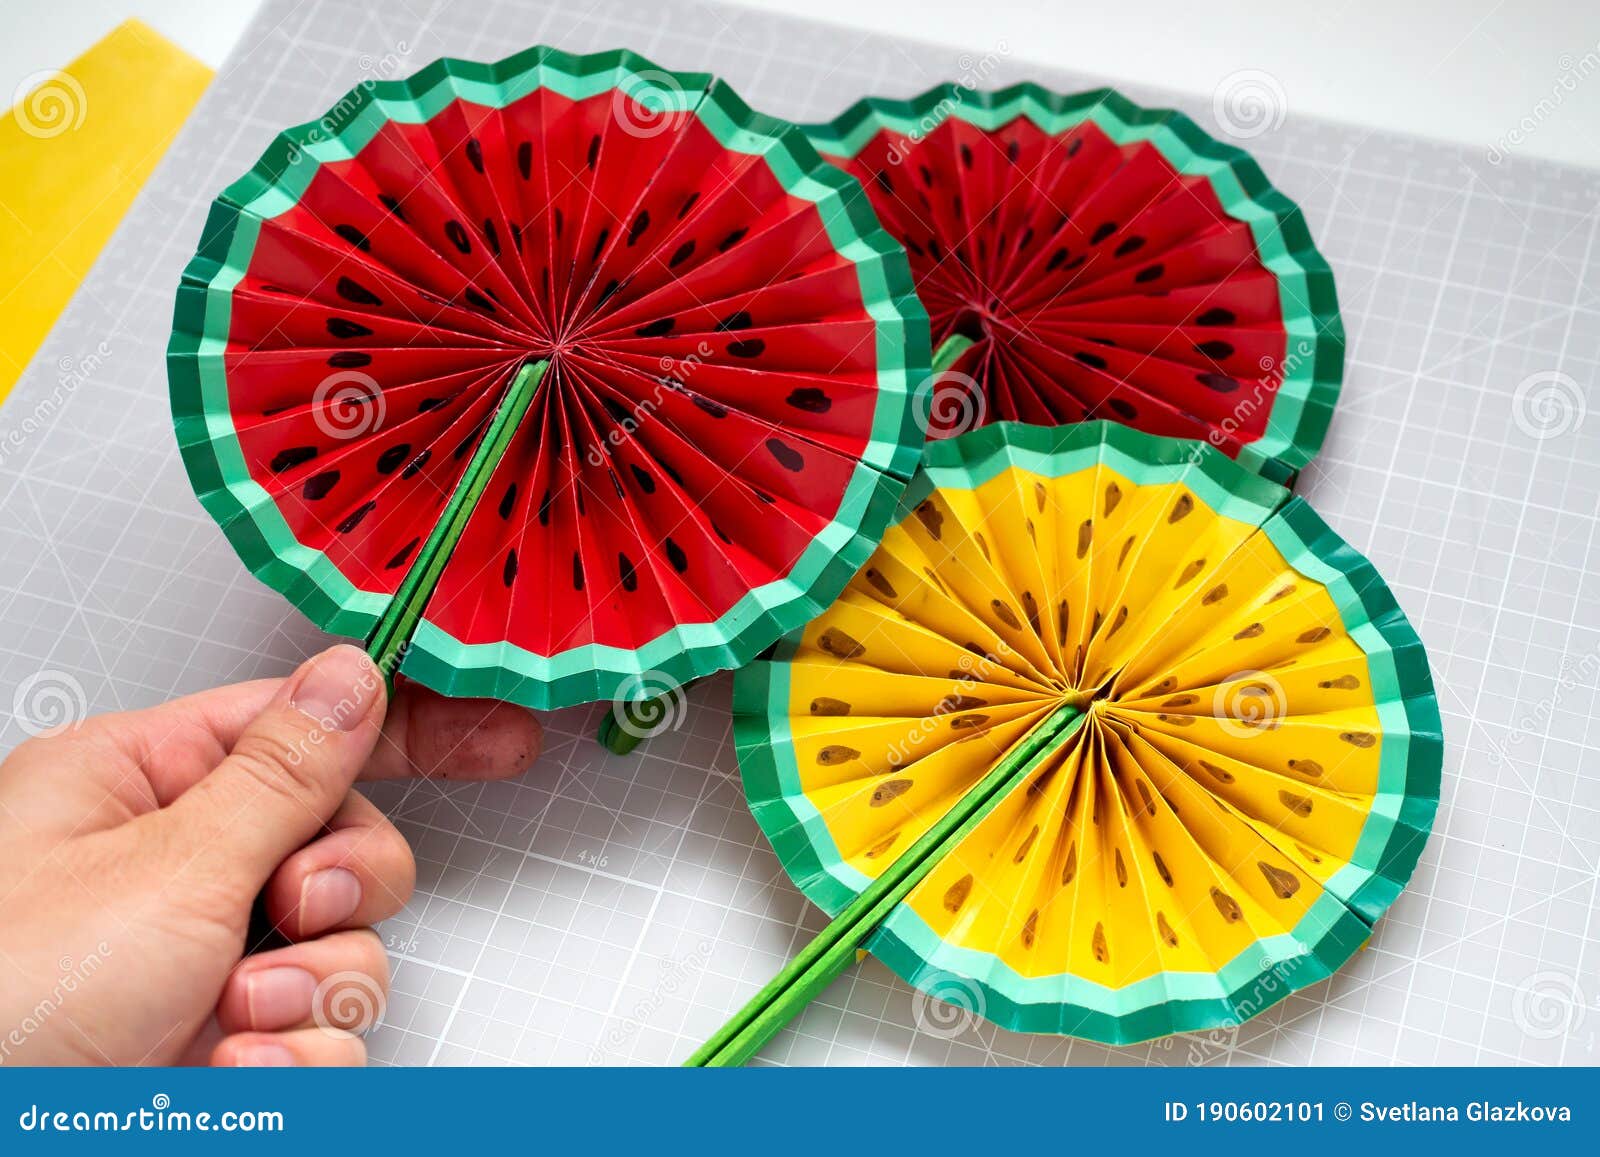 diy instruction. step by step tutorial. making decor for summer birthday party - red and yellow watermelon fan. craft